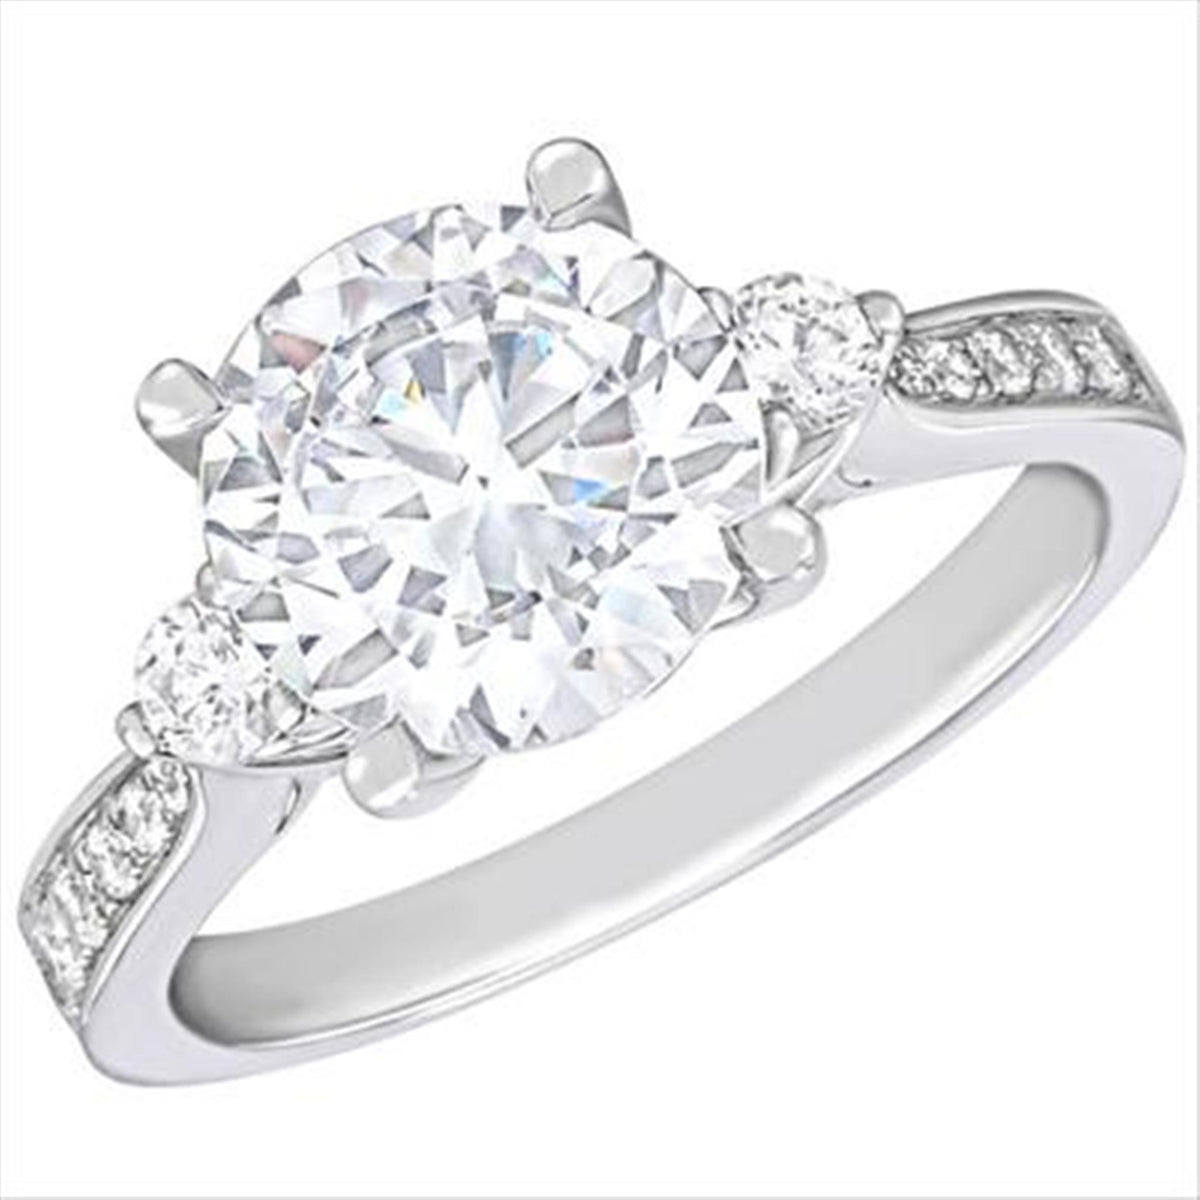 18Kt White Gold Classic Prong Engagement Ring Mounting With 0.37cttw Natural Diamonds